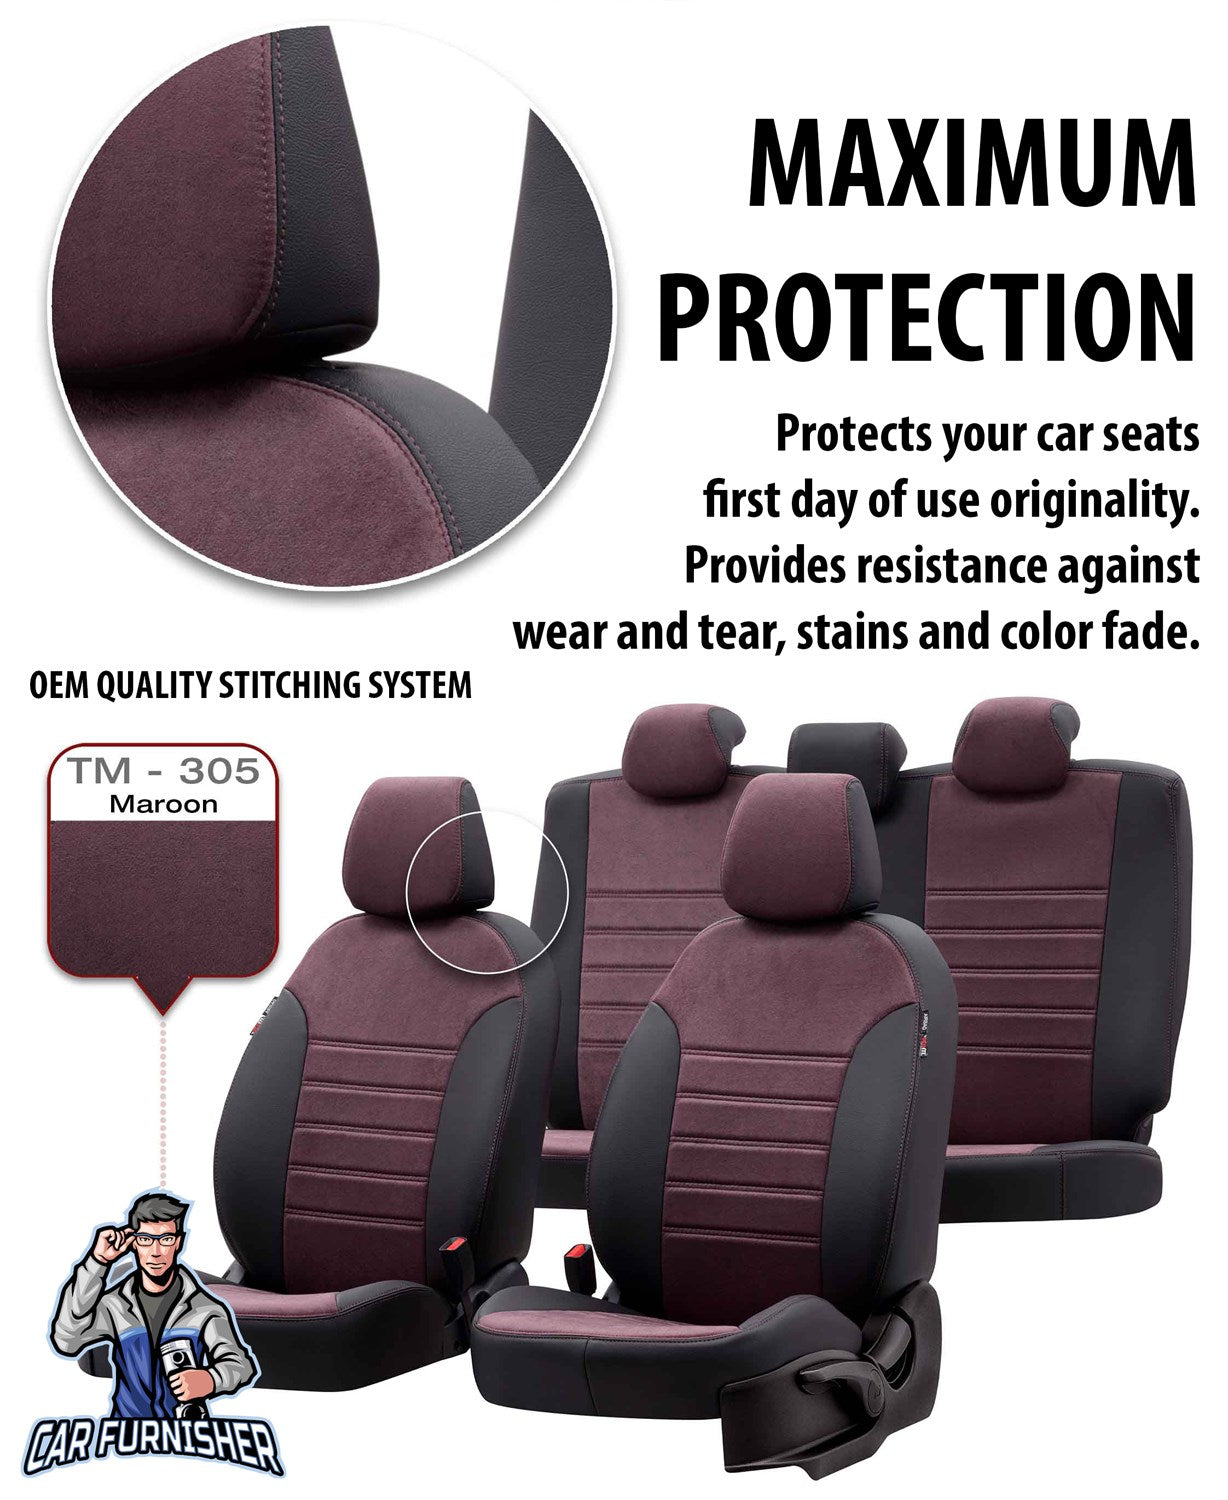 Daewoo Tacuma Seat Covers Milano Suede Design Smoked Leather & Suede Fabric